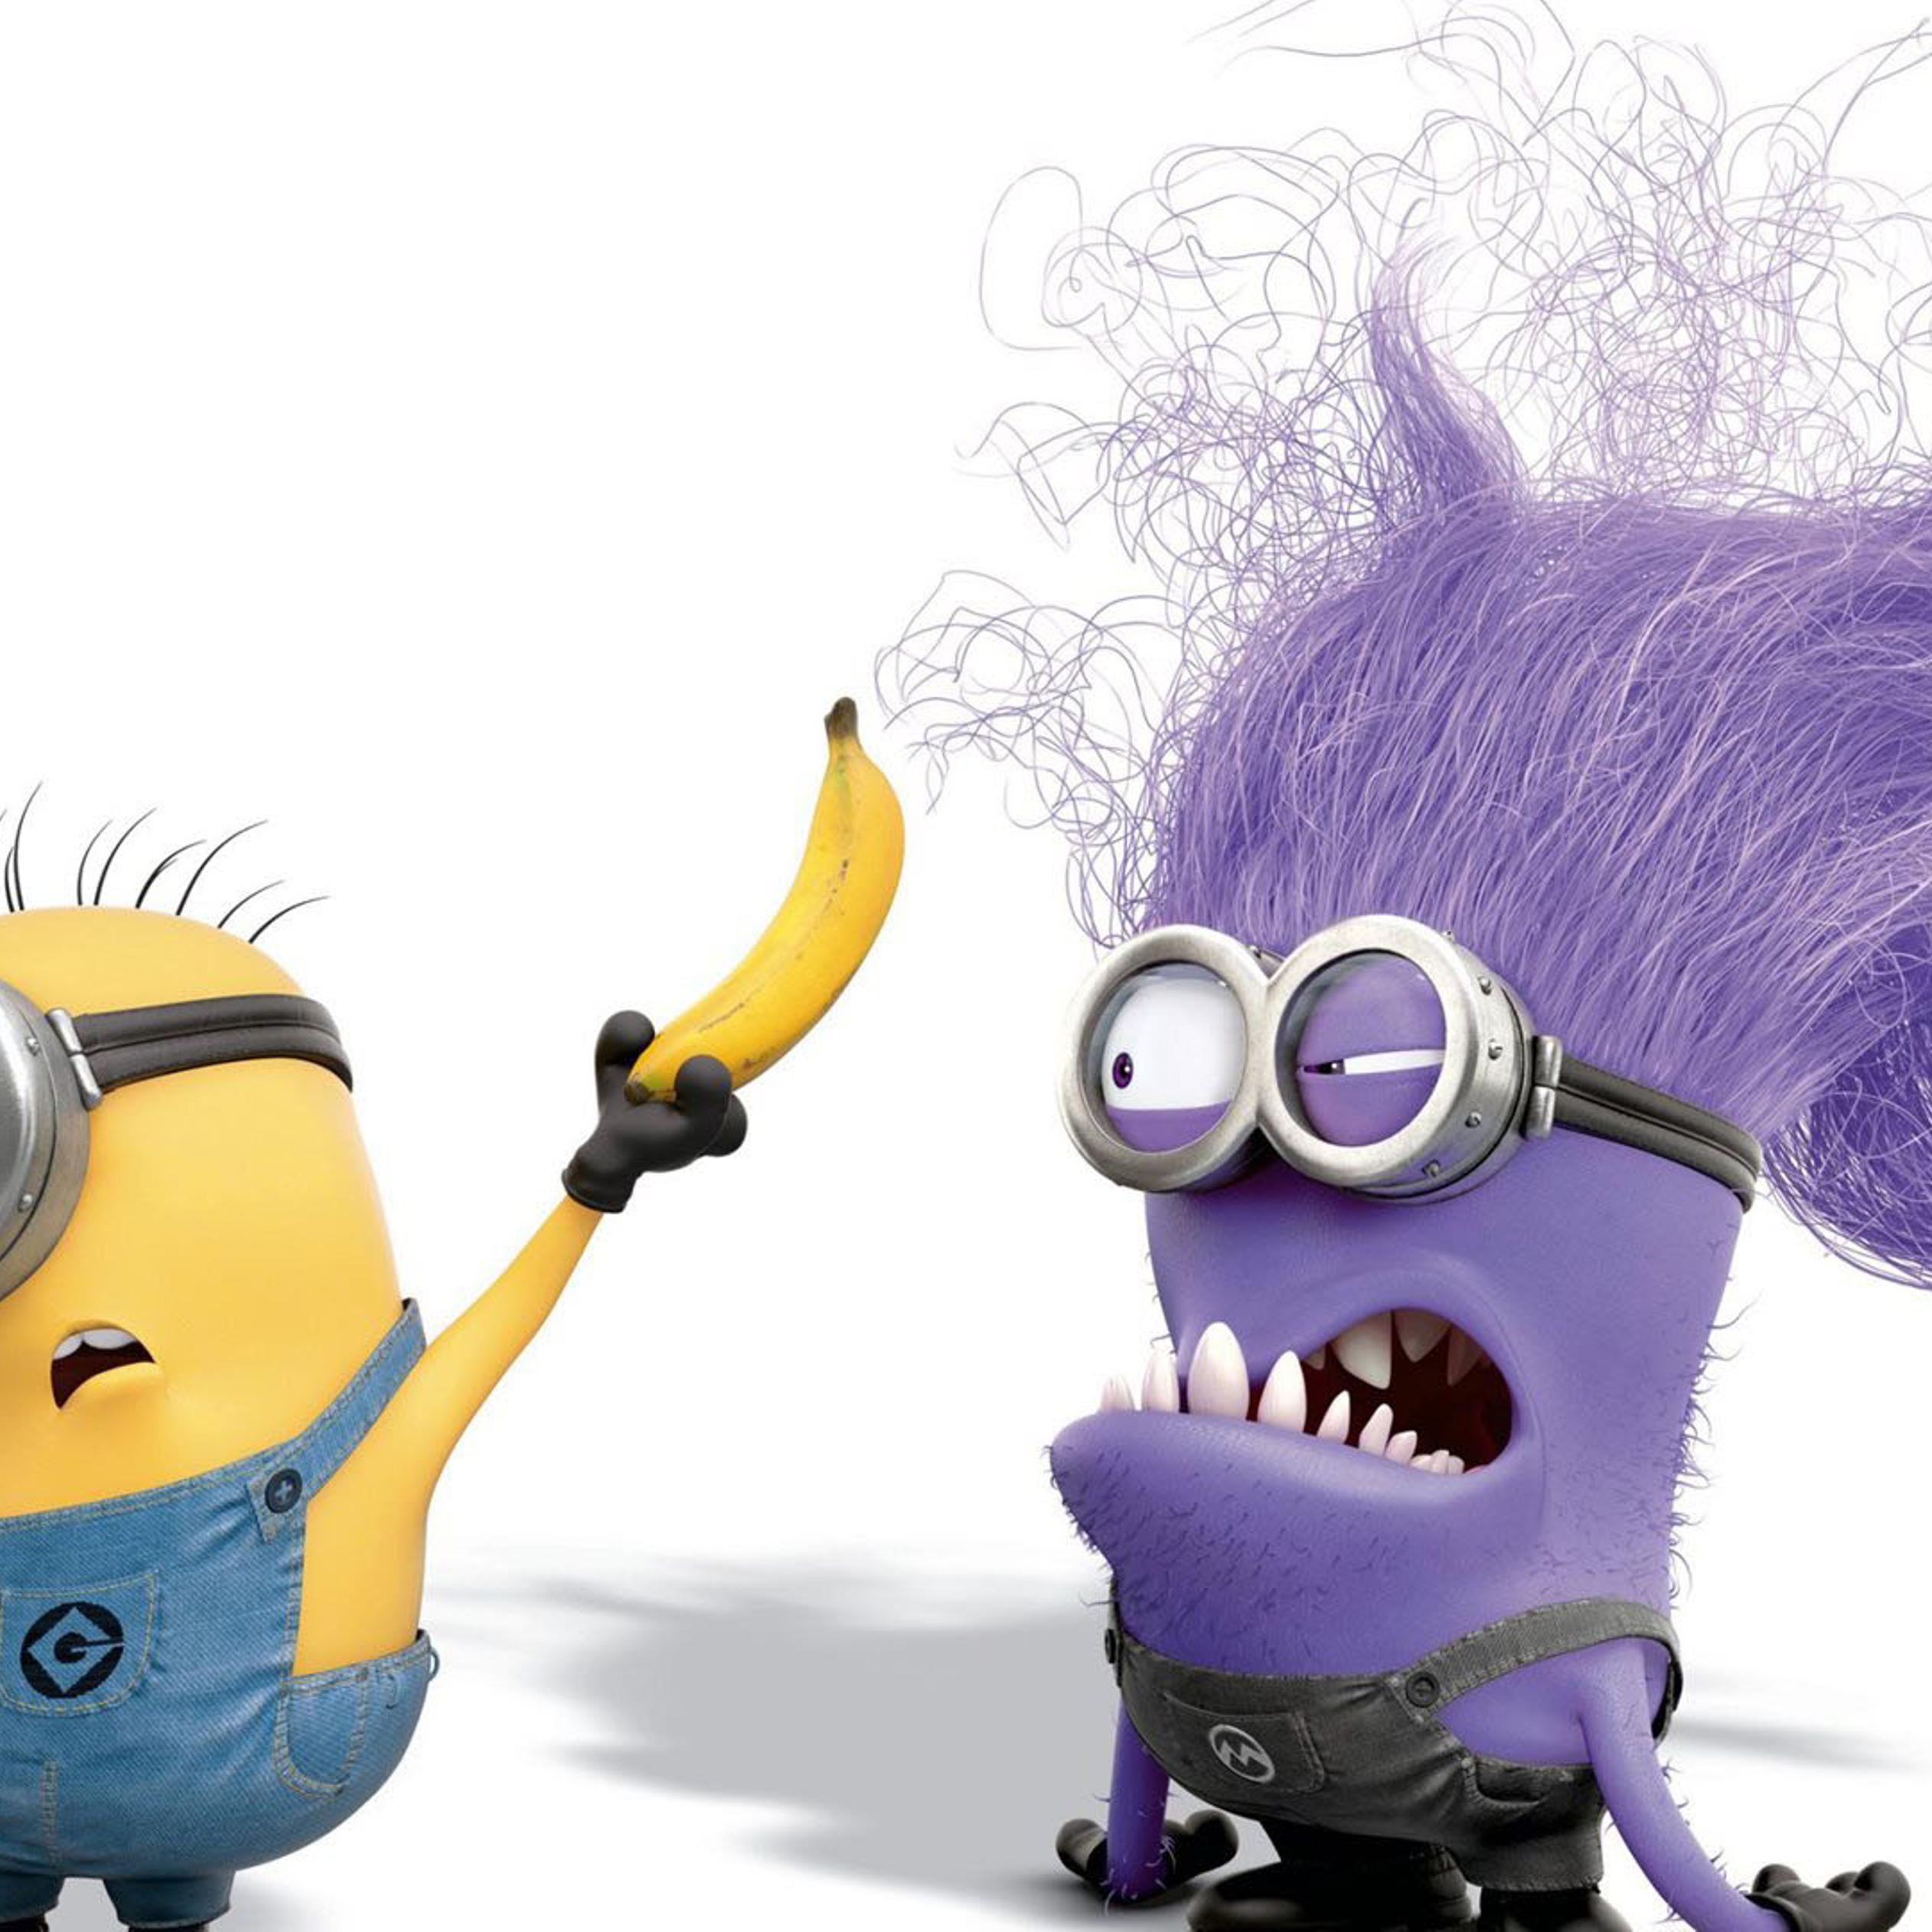 Minions Funny Wallpapers